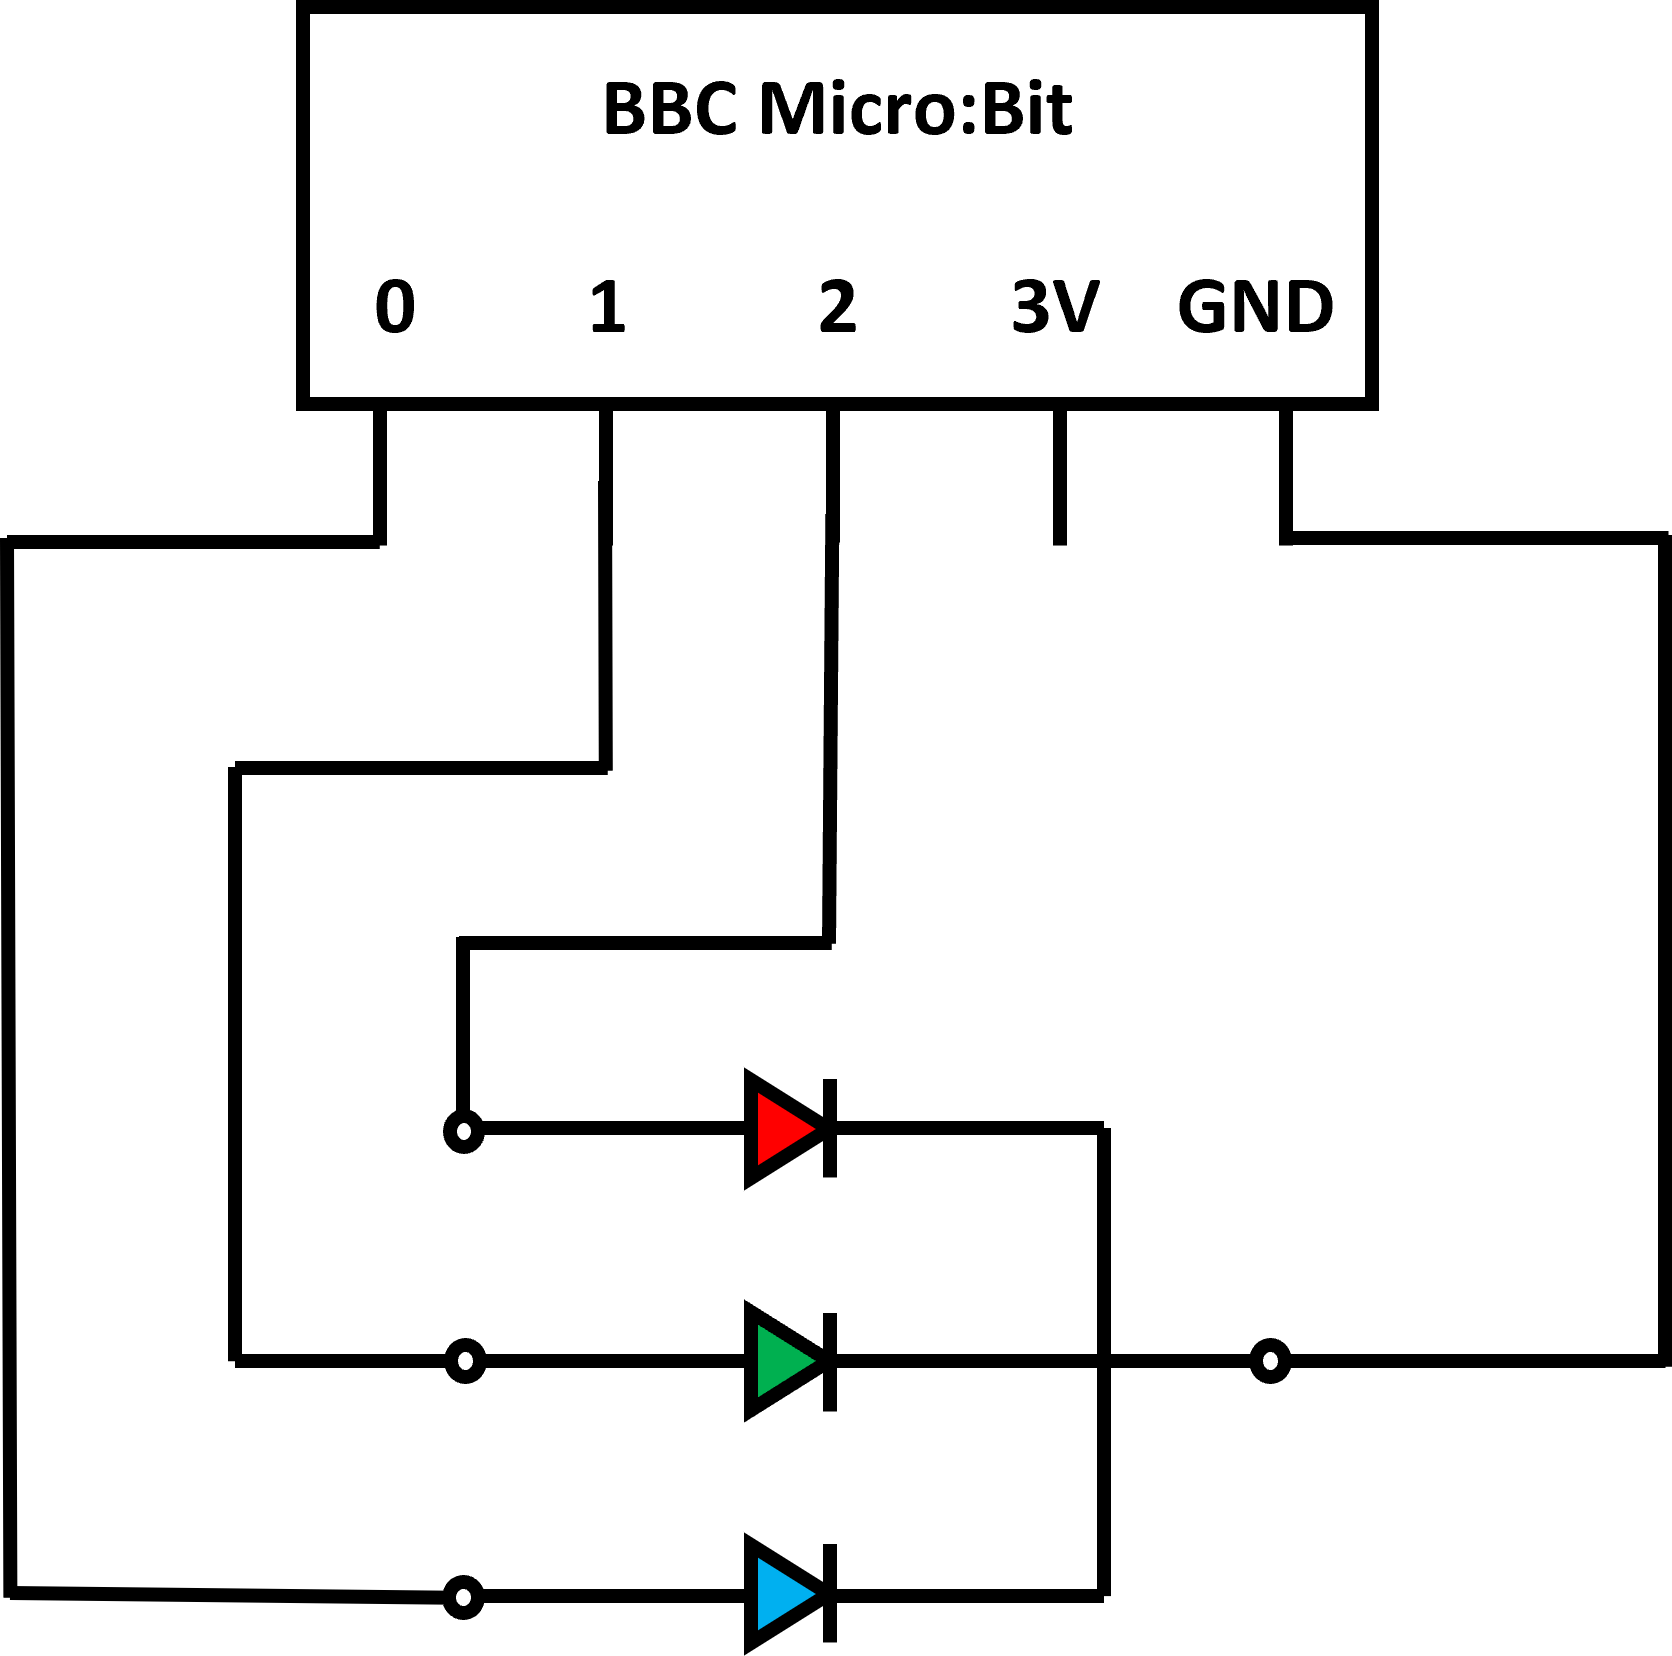 A circuit showing an RGB LED with the cathode connected to the GND pin on a Micro:Bit. The red pin of the LED is connected to pin 2 on the Micro:Bit, green to pin 1 and blue to pin 0.